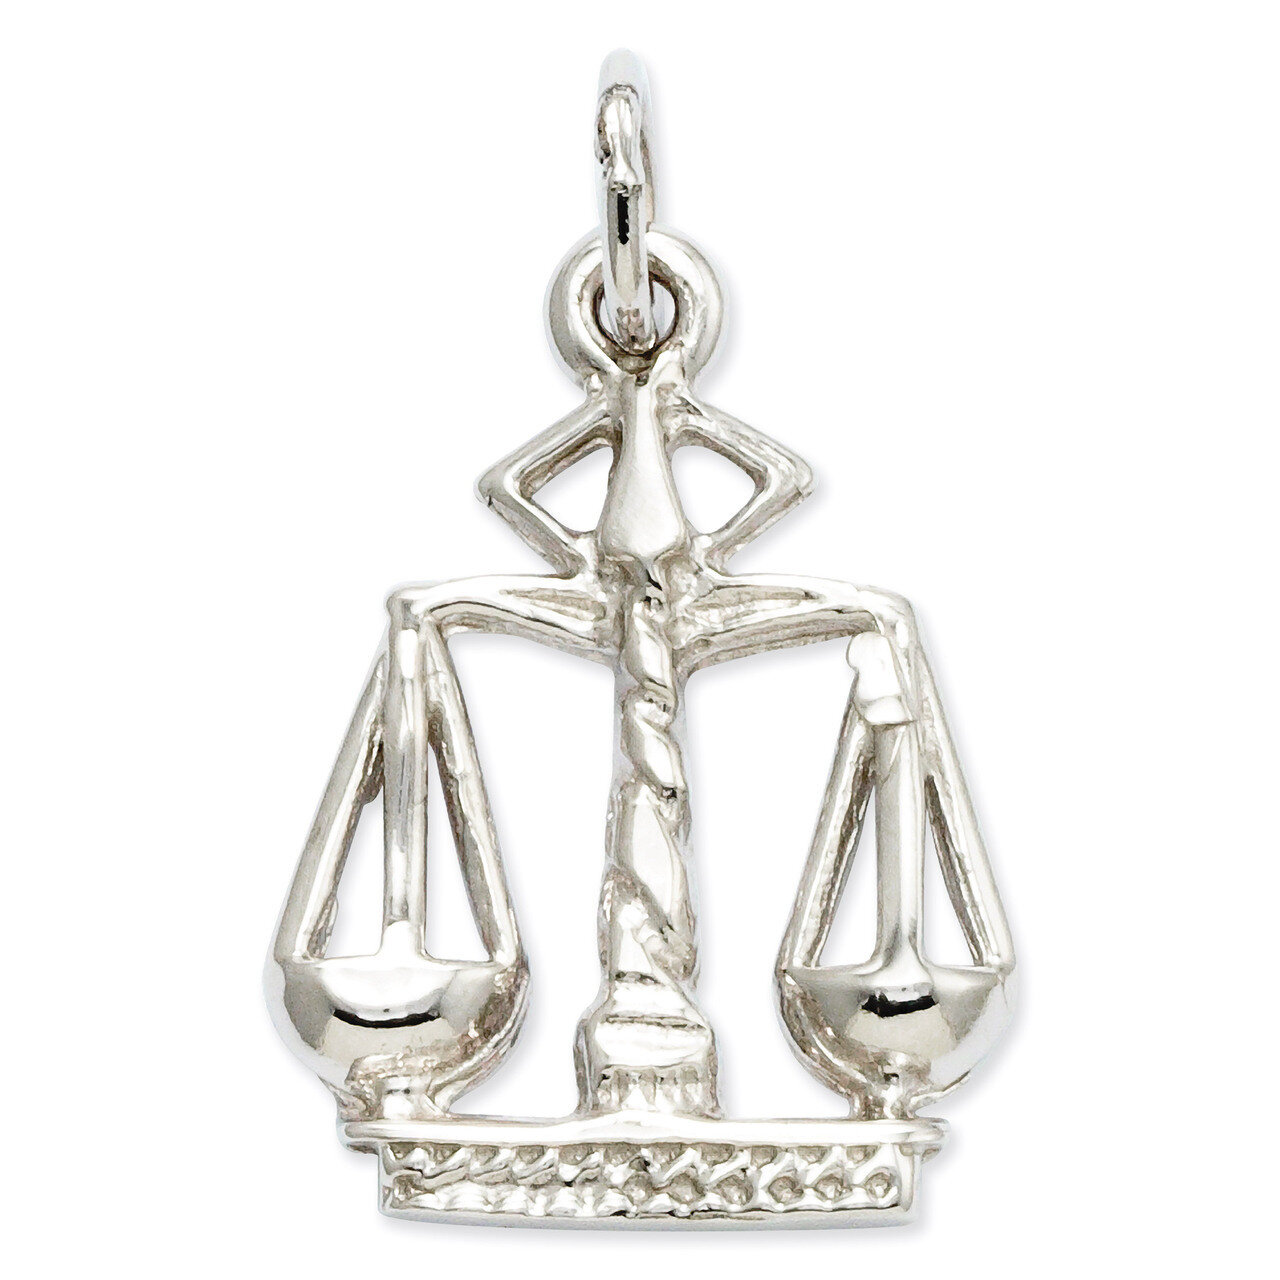 Polished Flat-Backed Small Scales of Justice Charm 14k White Gold K933